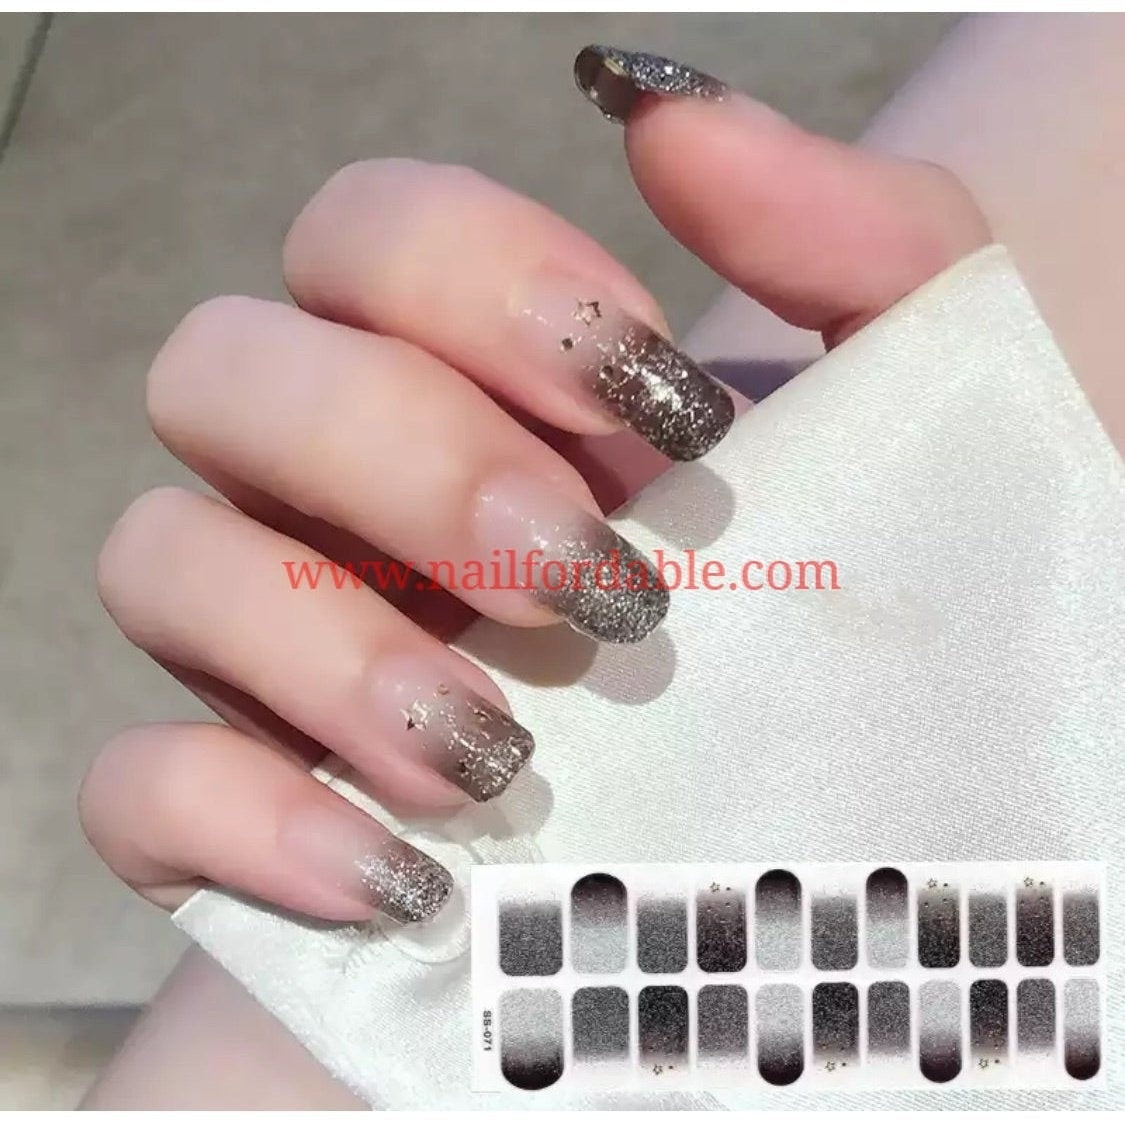 Shadow french tips Nail Wraps | Semi Cured Gel Wraps | Gel Nail Wraps |Nail Polish | Nail Stickers